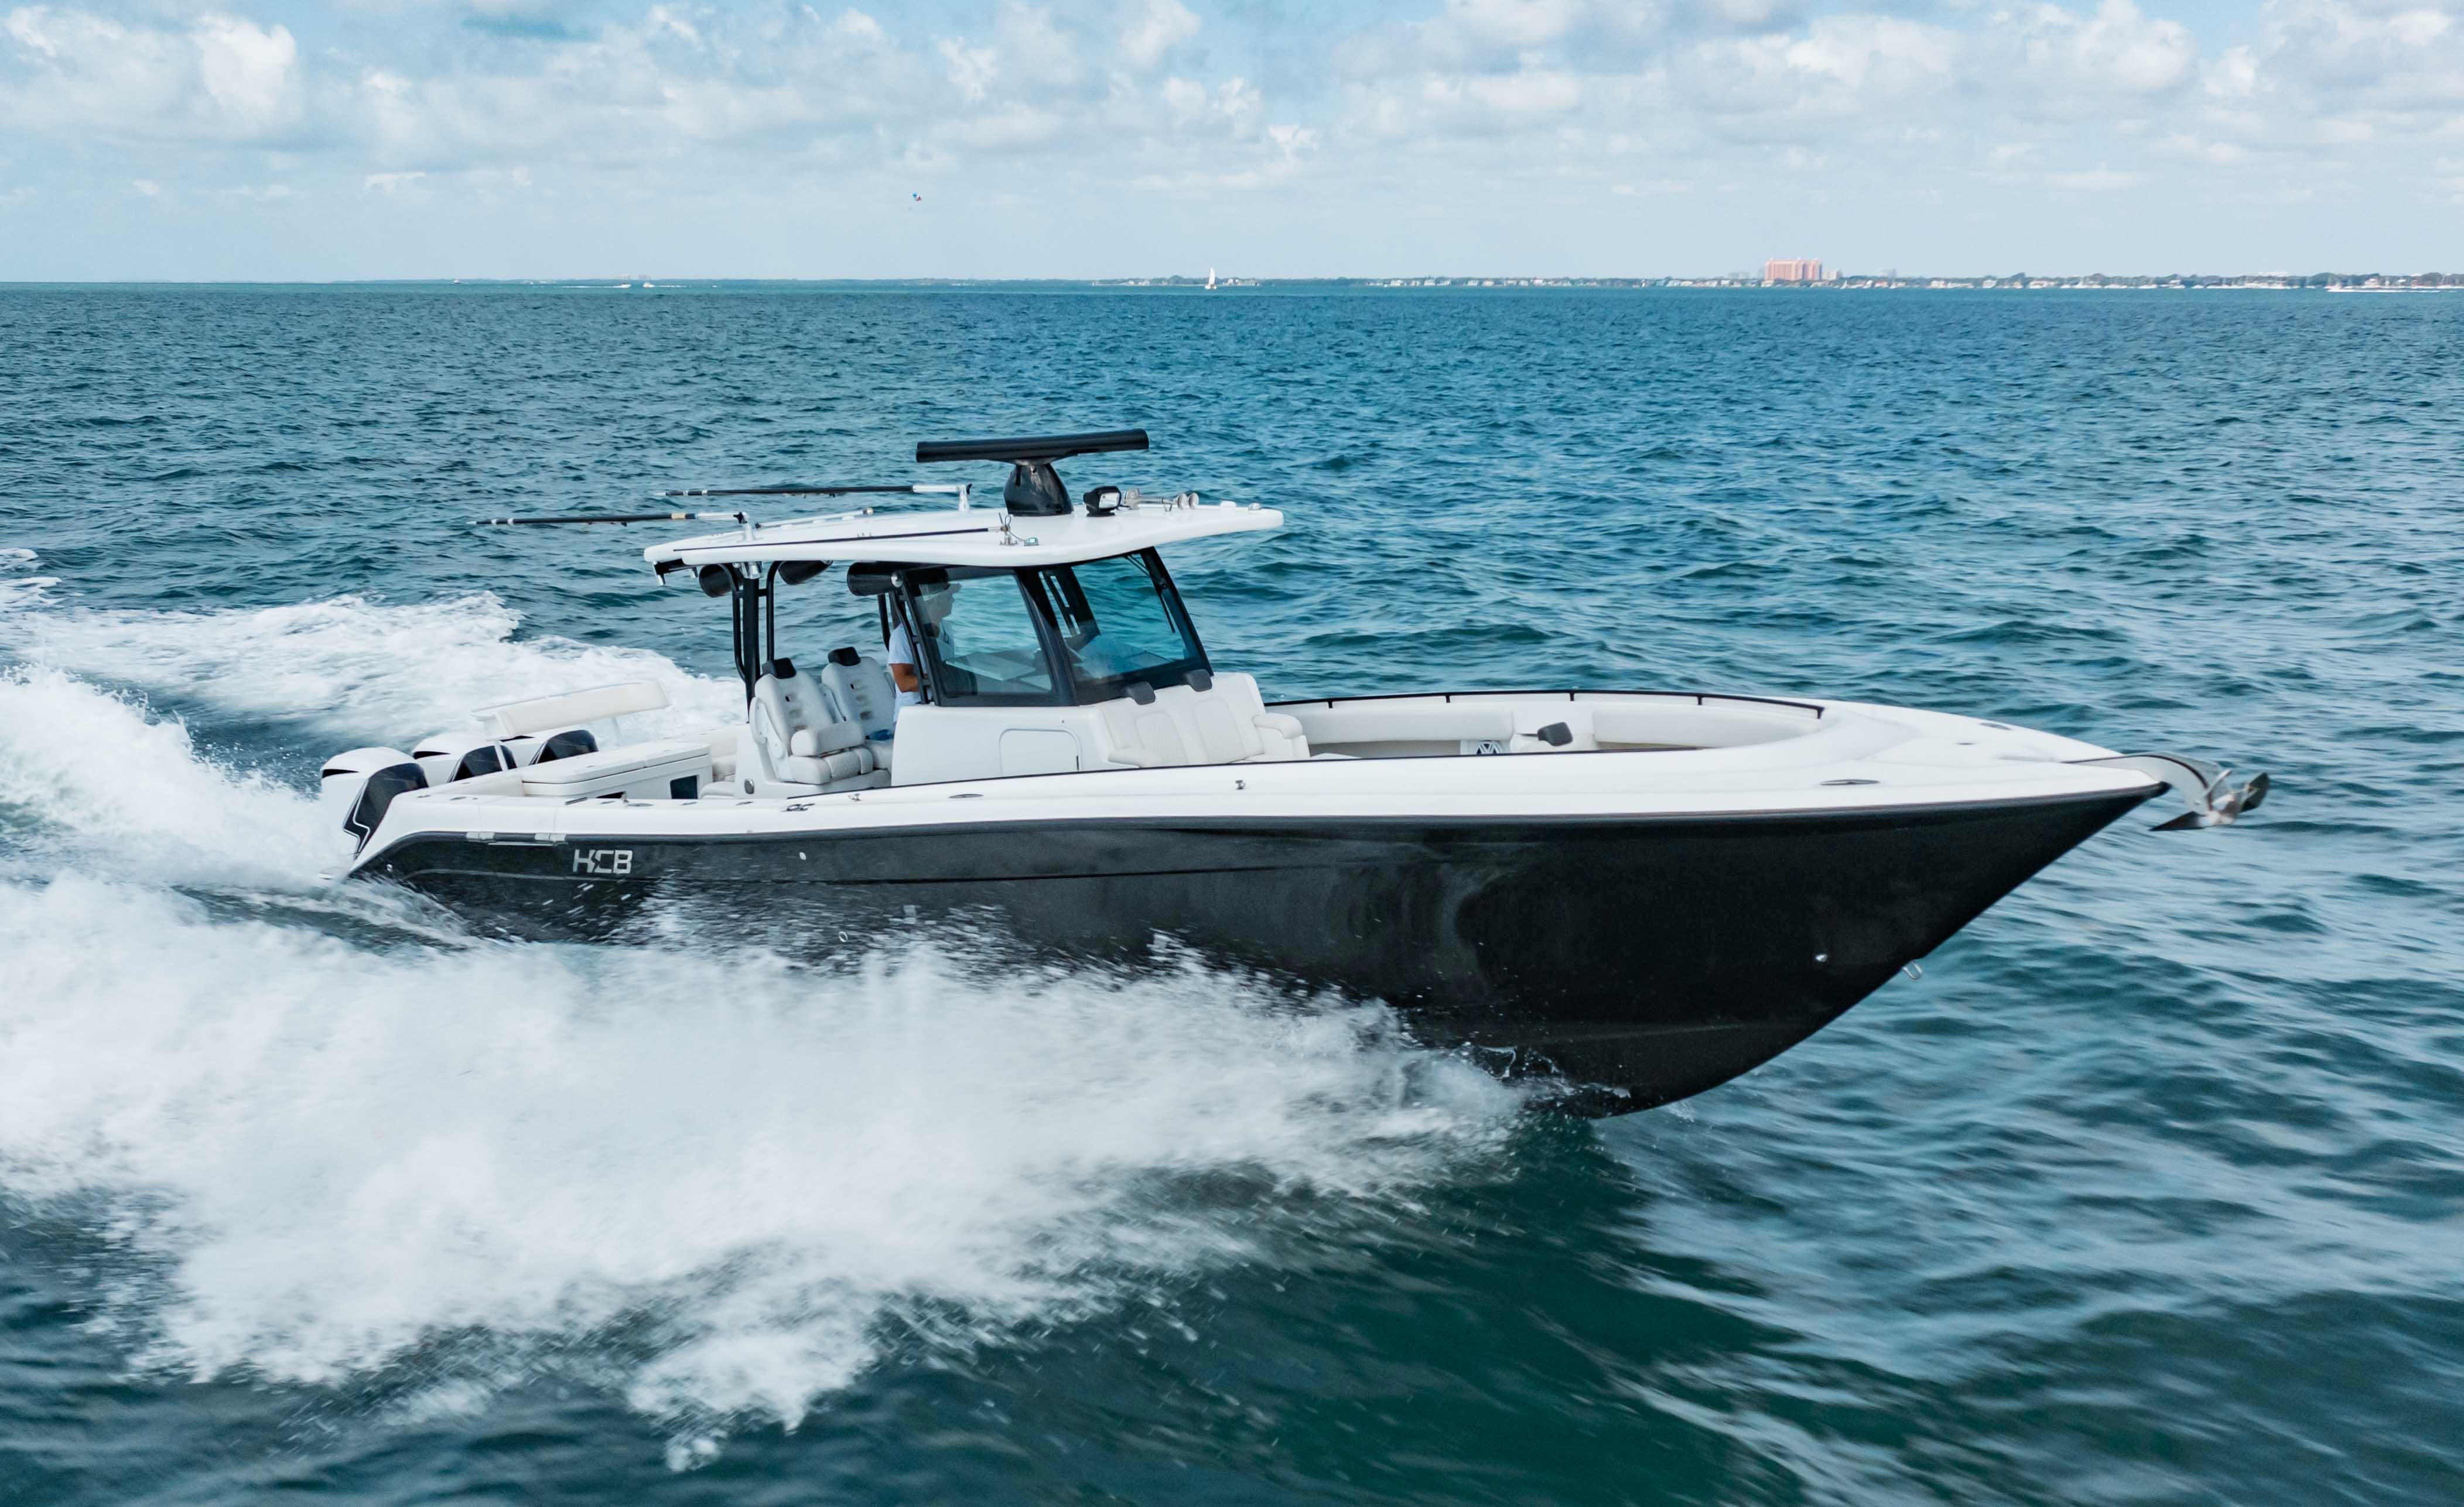 39 Hcb 2019 Miami, Florida Sold on 2021-05-20 by Denison Yacht Sales